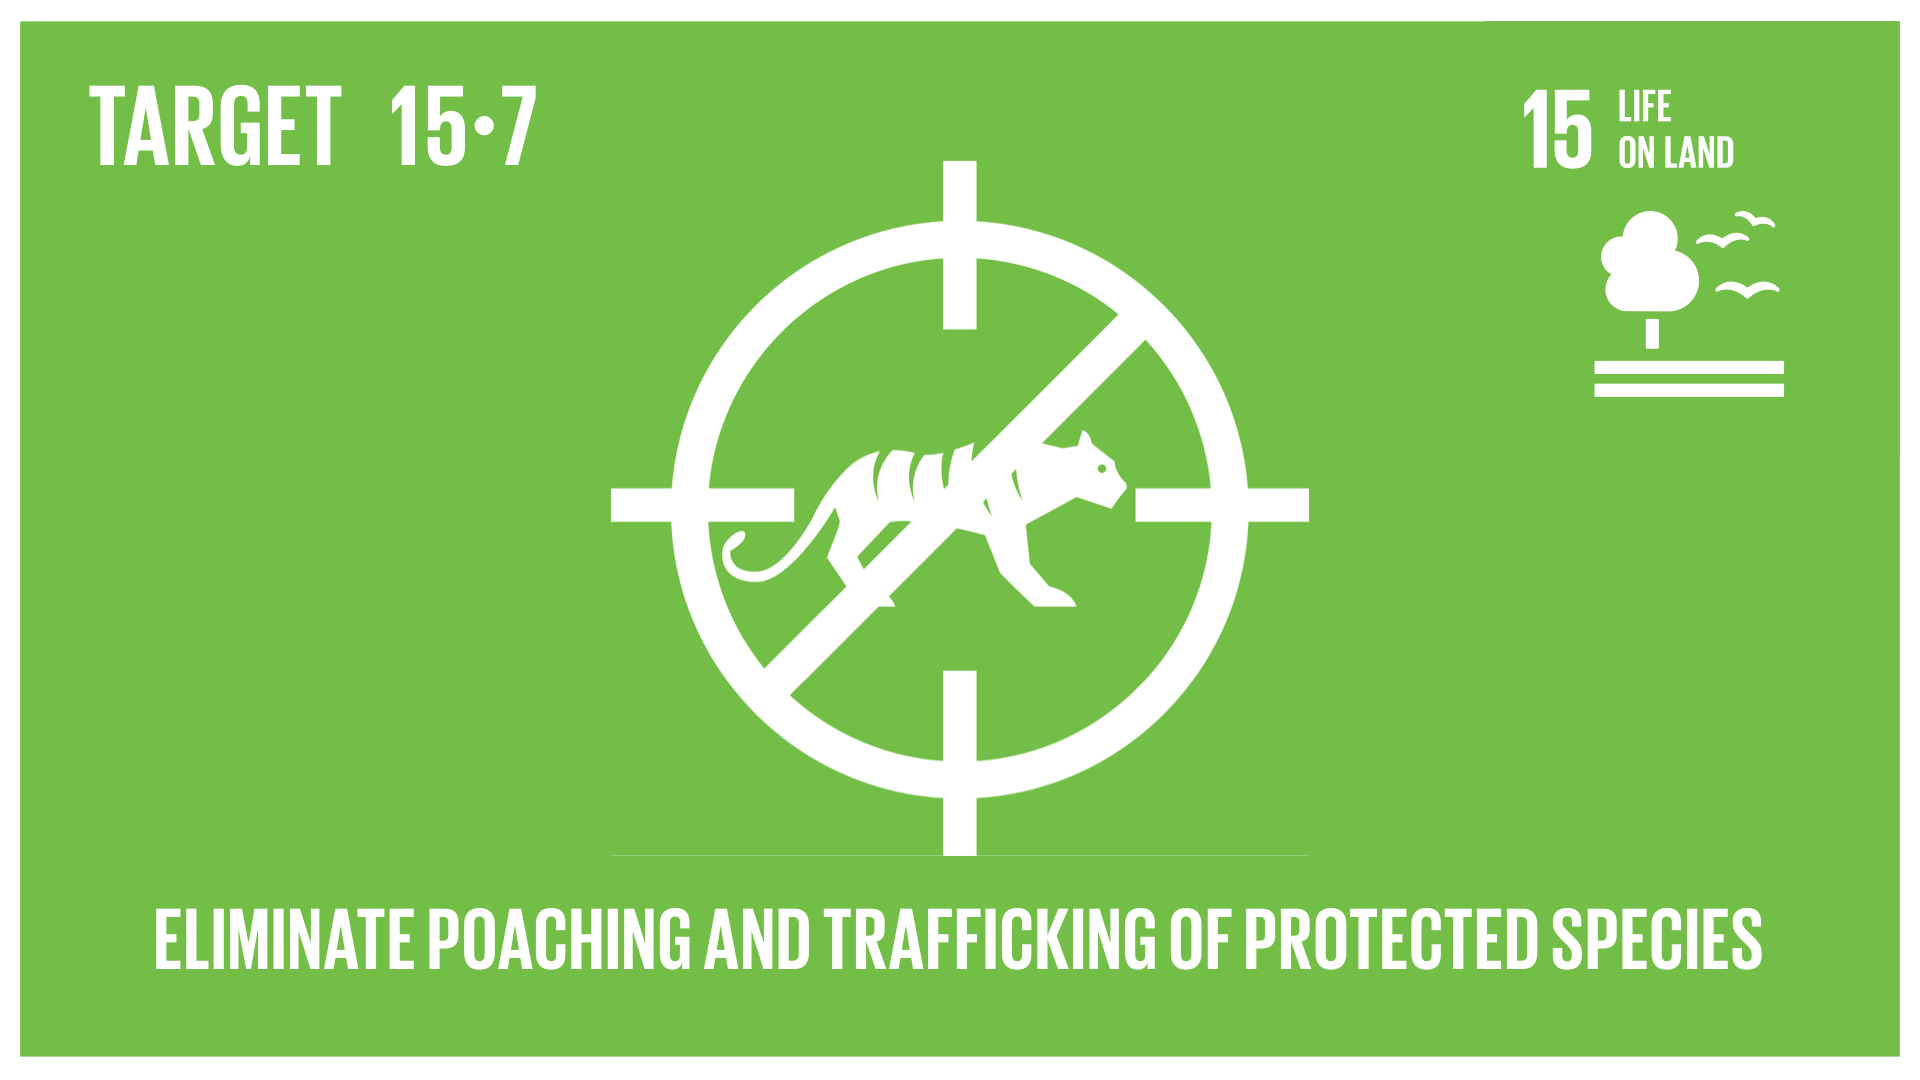 Graphic displaying the elimination of poaching and trafficking of protected species 